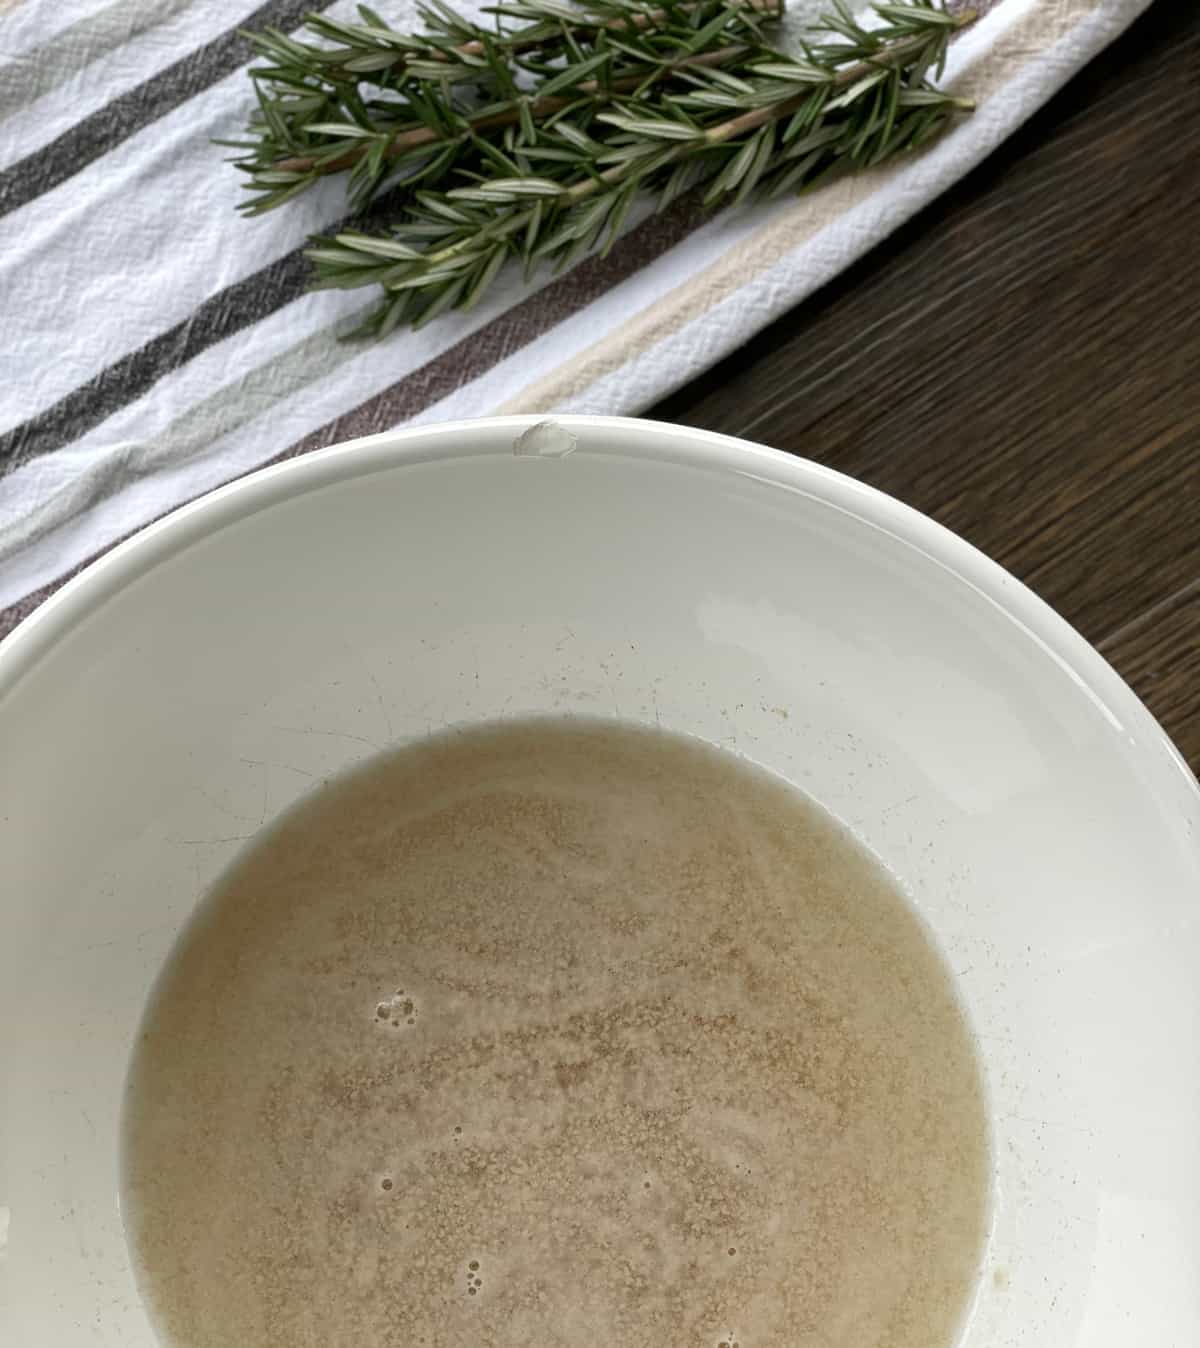 How to make the yeast for the focaccia dough 